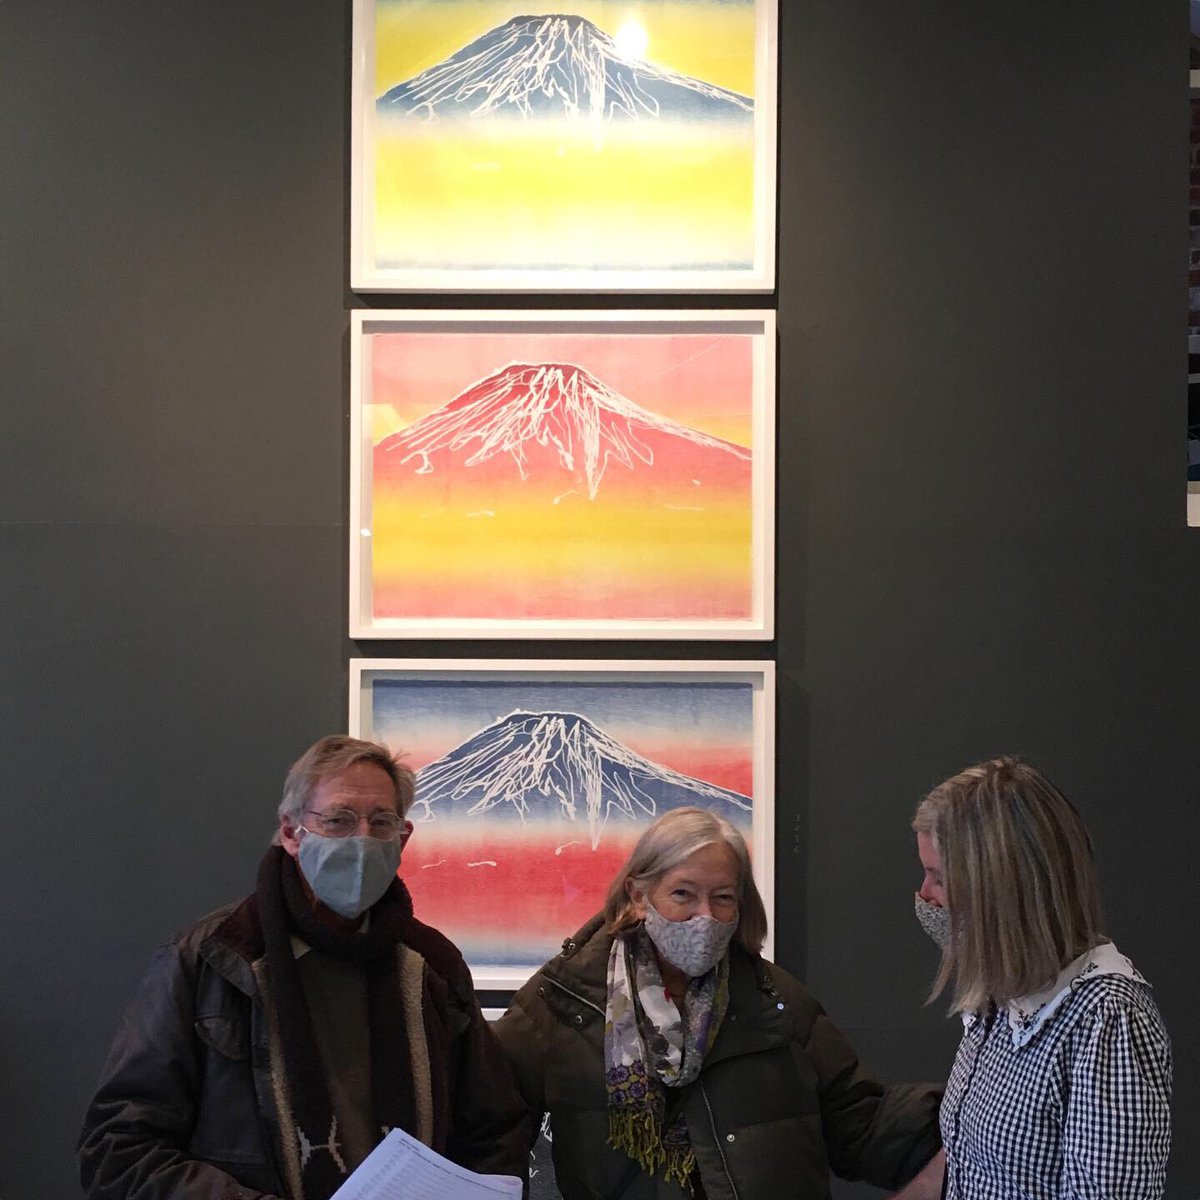 “The Mountains are Calling” is open @RableyGallery 💫🏔thank you to Meryl & team for all the hard work, so proud to show my folks & good friends the exhibition & chat to visitors, thank you for the support. Show runs until 18/12🙏